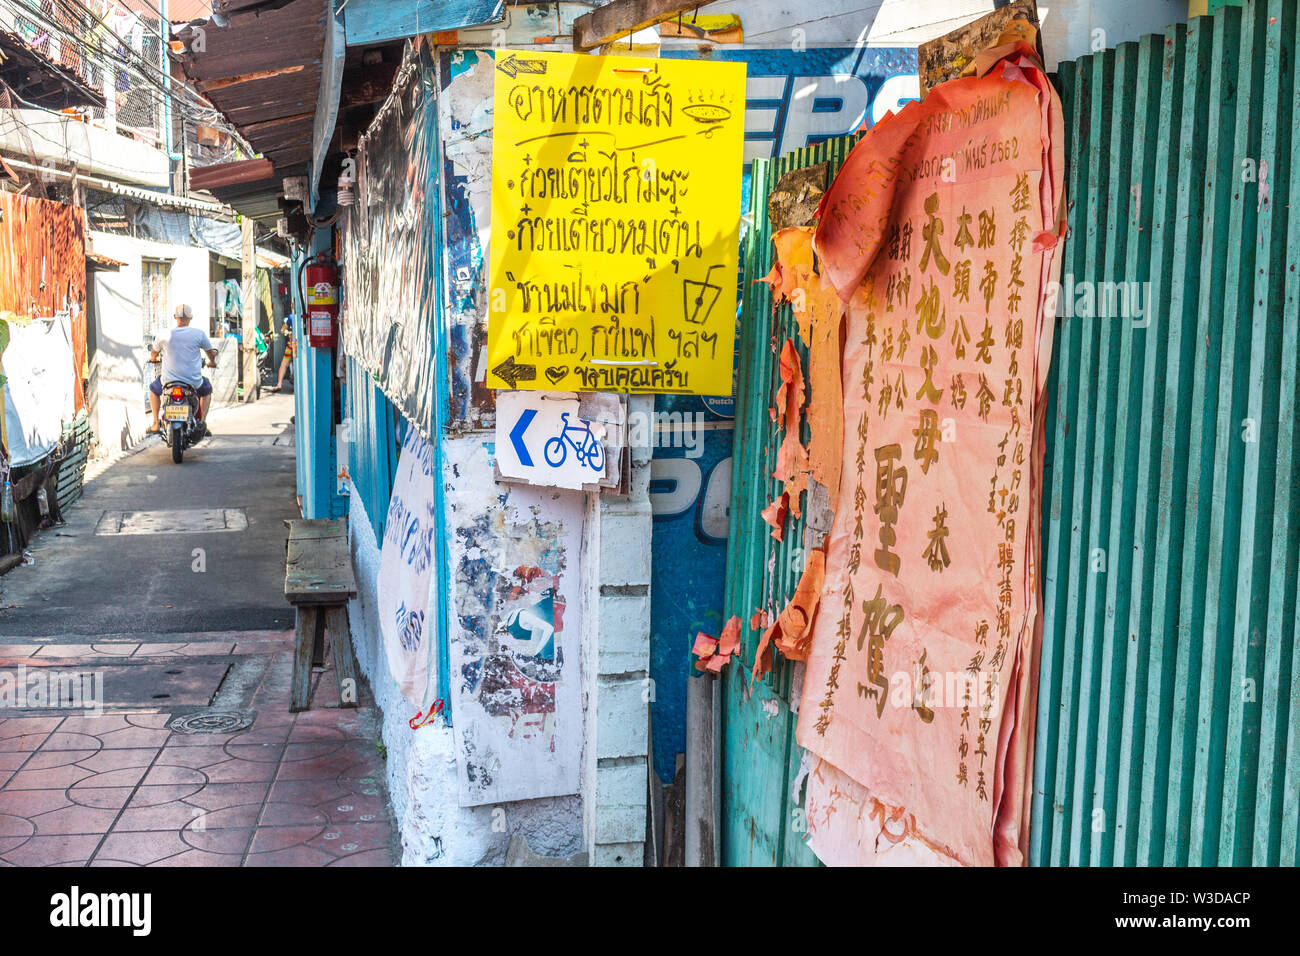 Bangkok, Thailand - April 14, 2019: Chinese and thai banners on the walls of a paved street in a residential neigborhood in central Bangkok Stock Photo